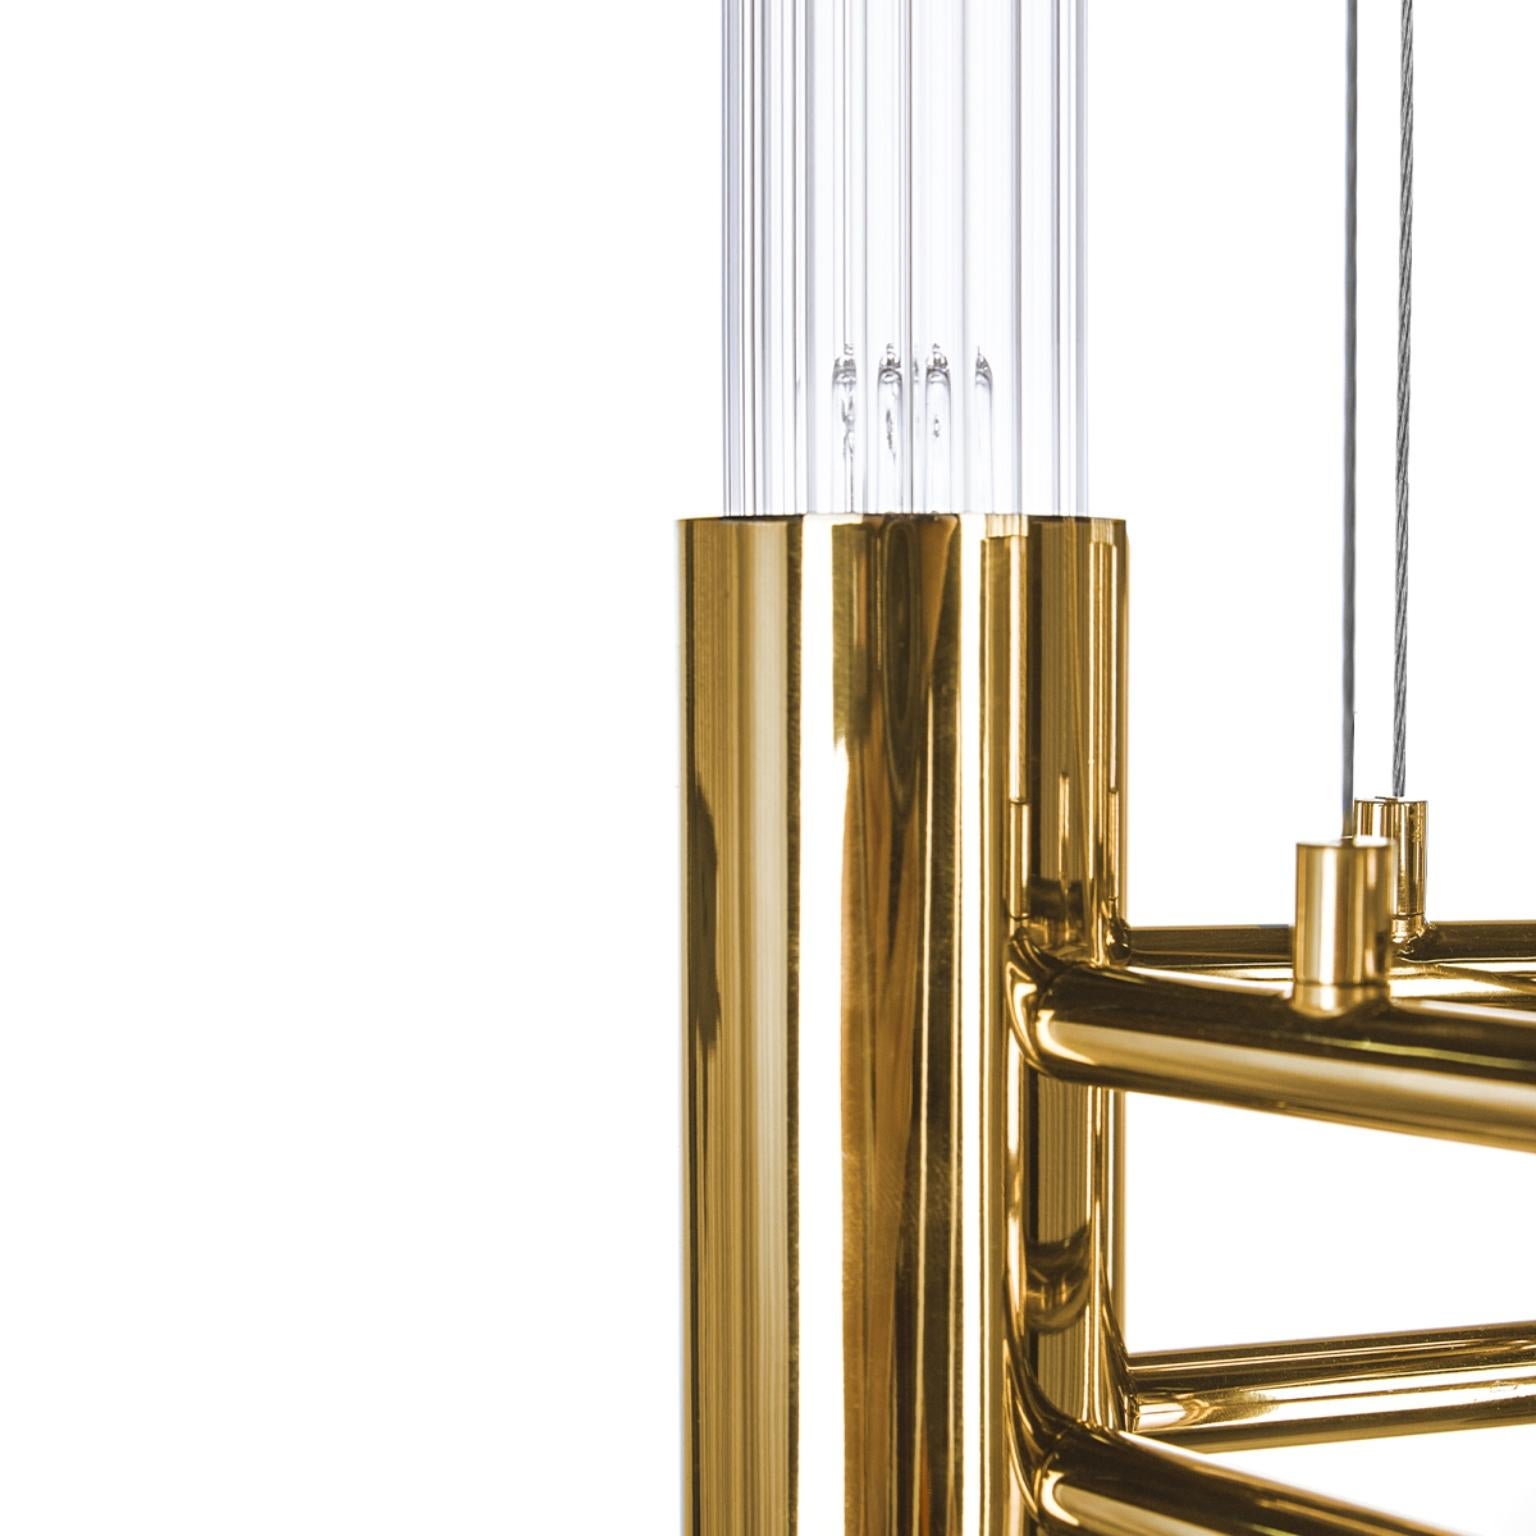 Embodying the natural sensation of waterfalls through gold-plated brass and handmade crystal tubes, it is the elegant waterfall extra large pendant’s details that distinguish this piece from its smaller original lamp, offering a timeless design that